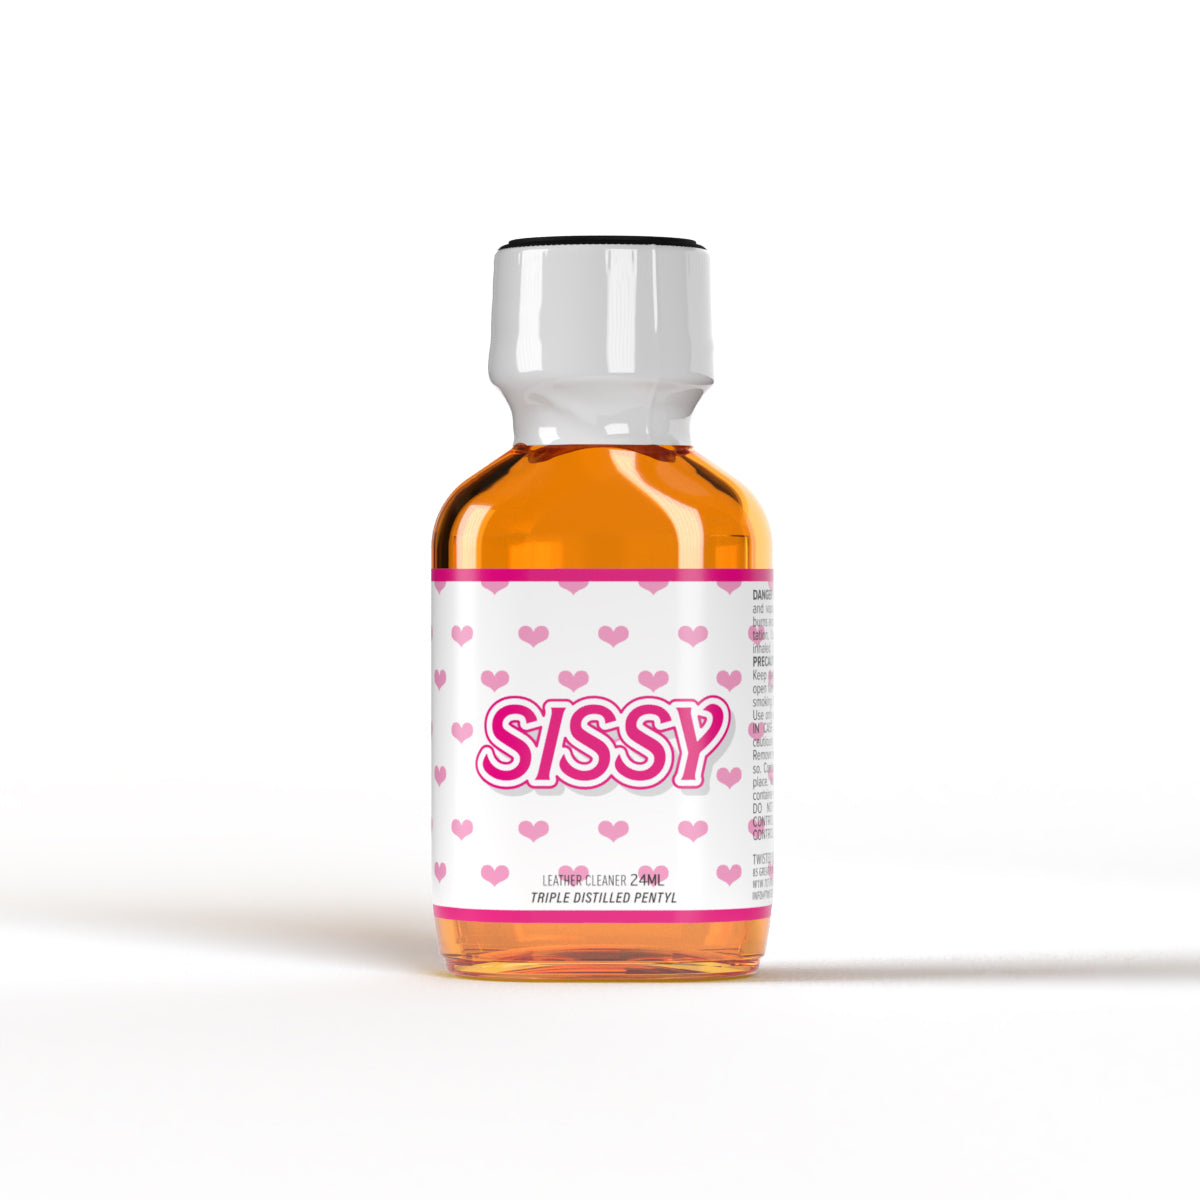 A product photo of a bottle of Sissy Poppers.